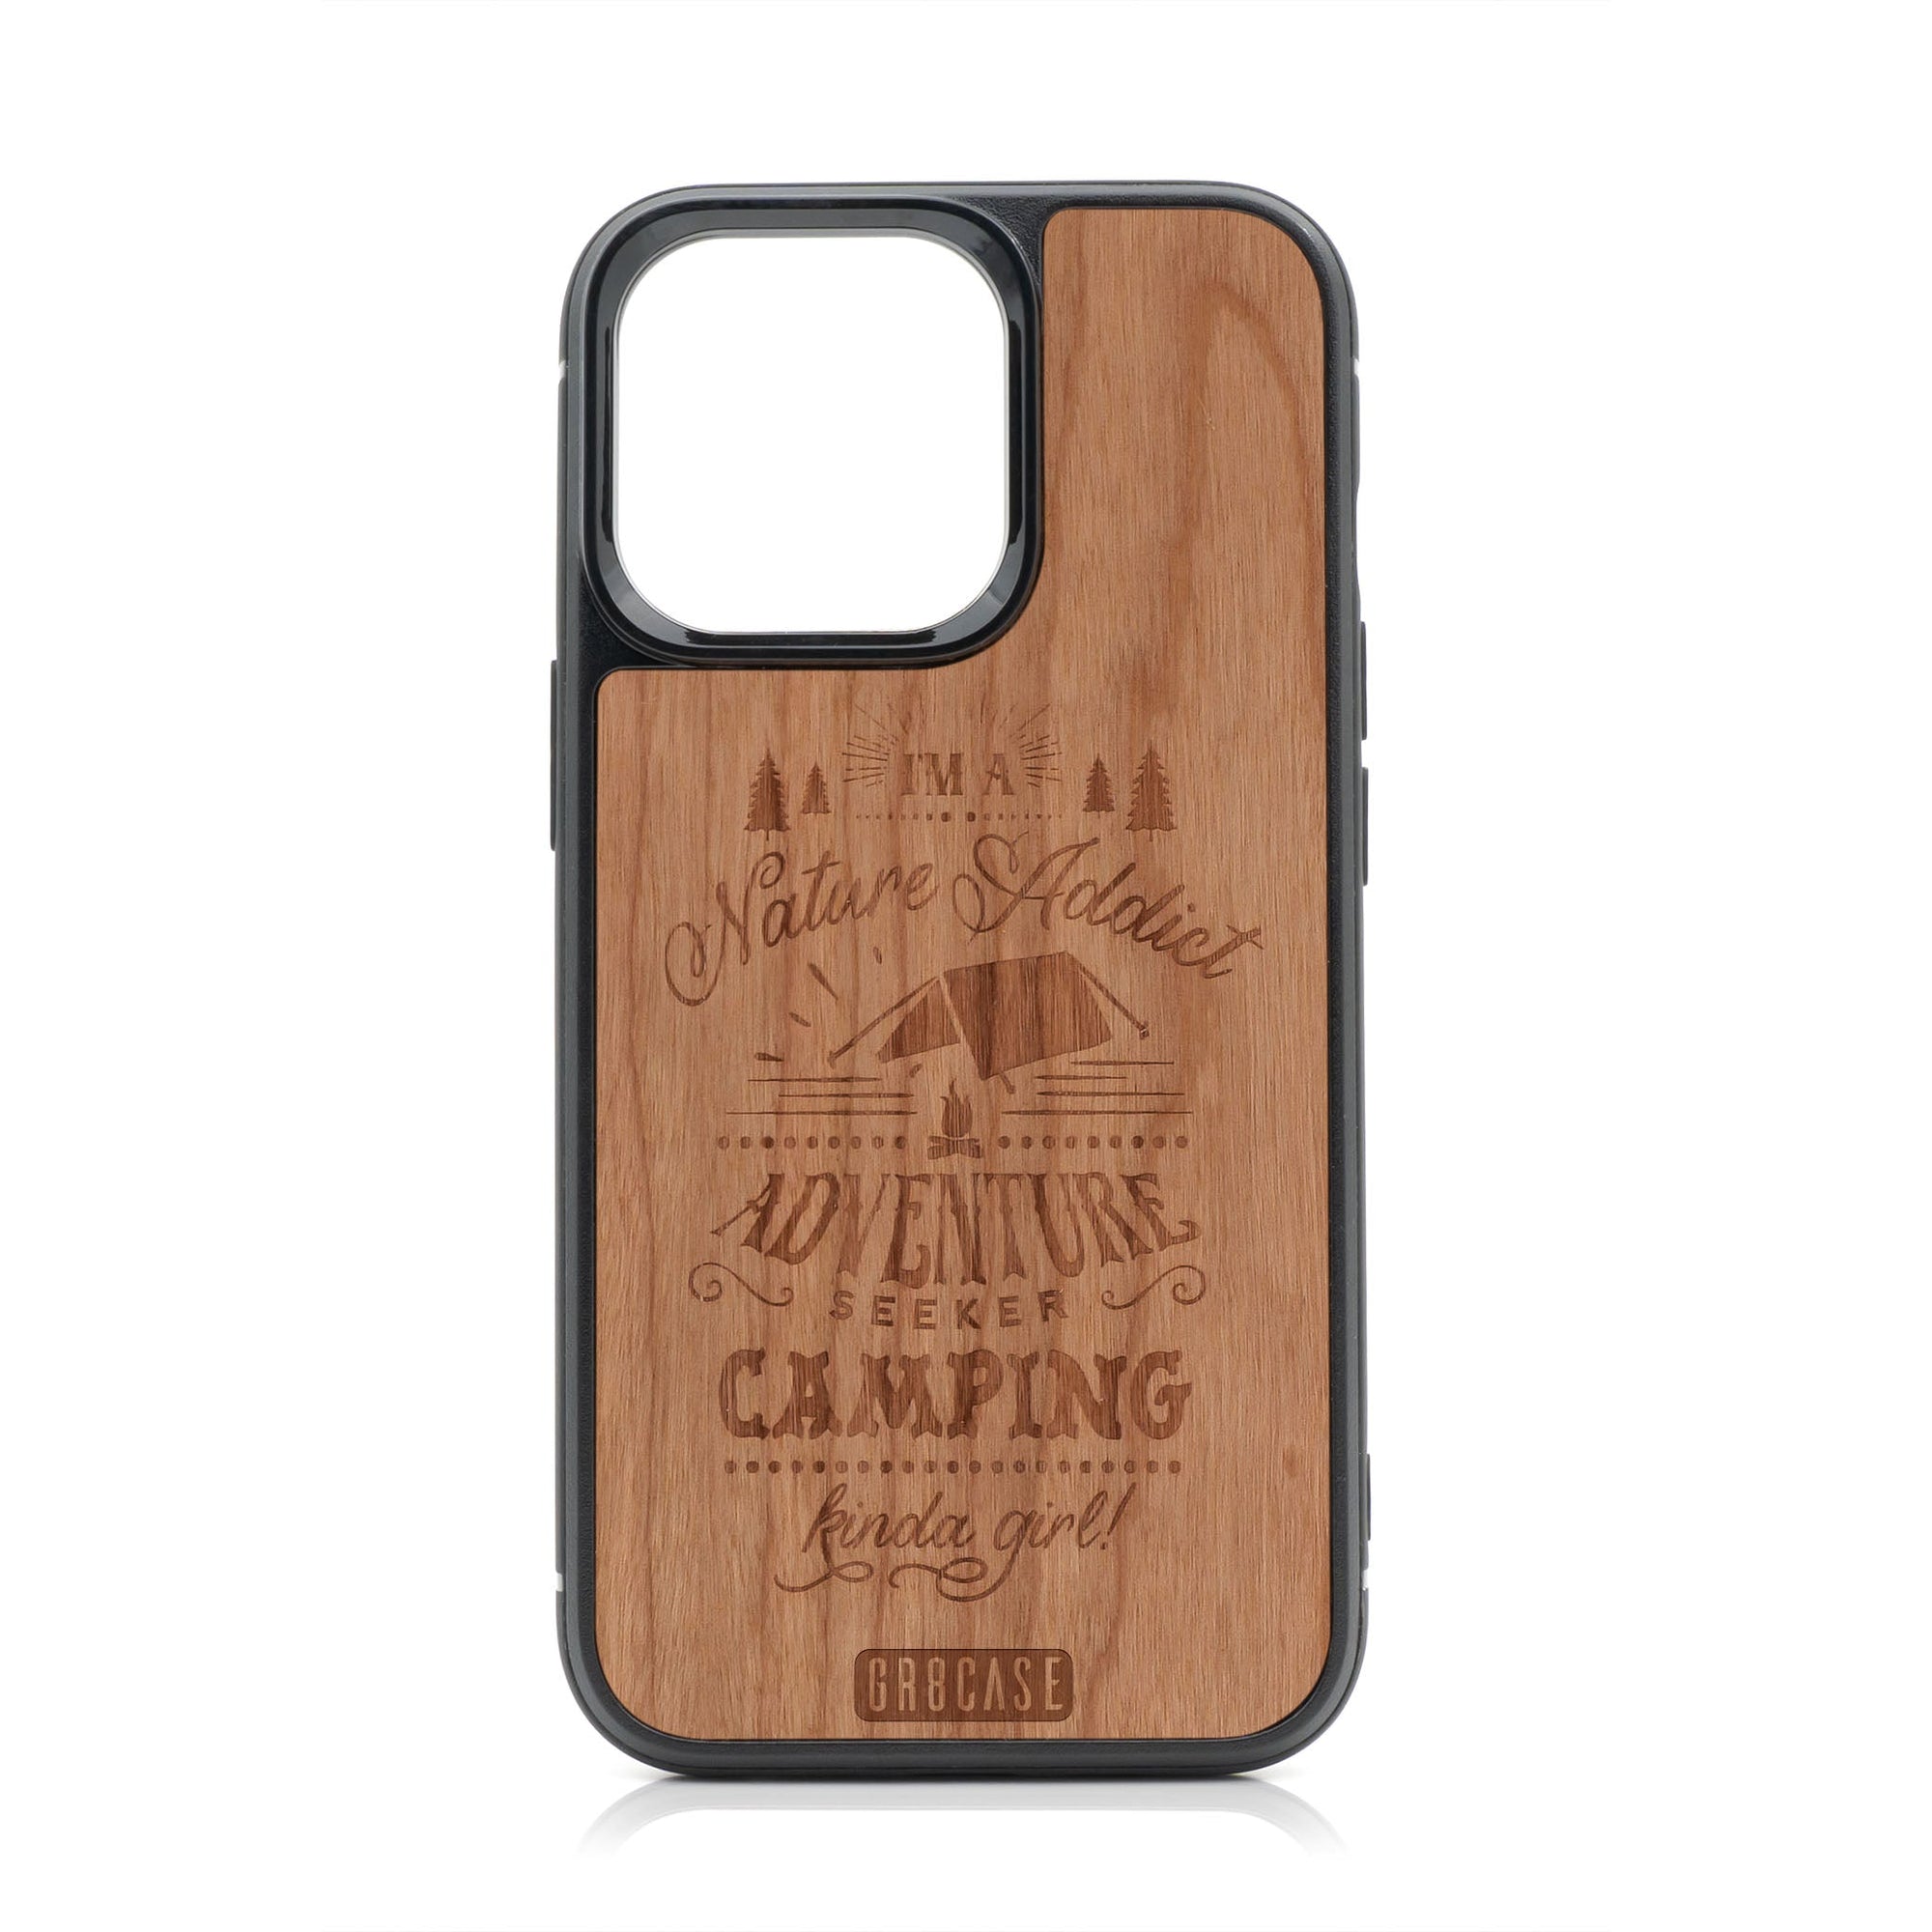 I'm A Nature Addict Adventure Seeker Camping Kinda Girl Design Wood Case For iPhone 15 Pro